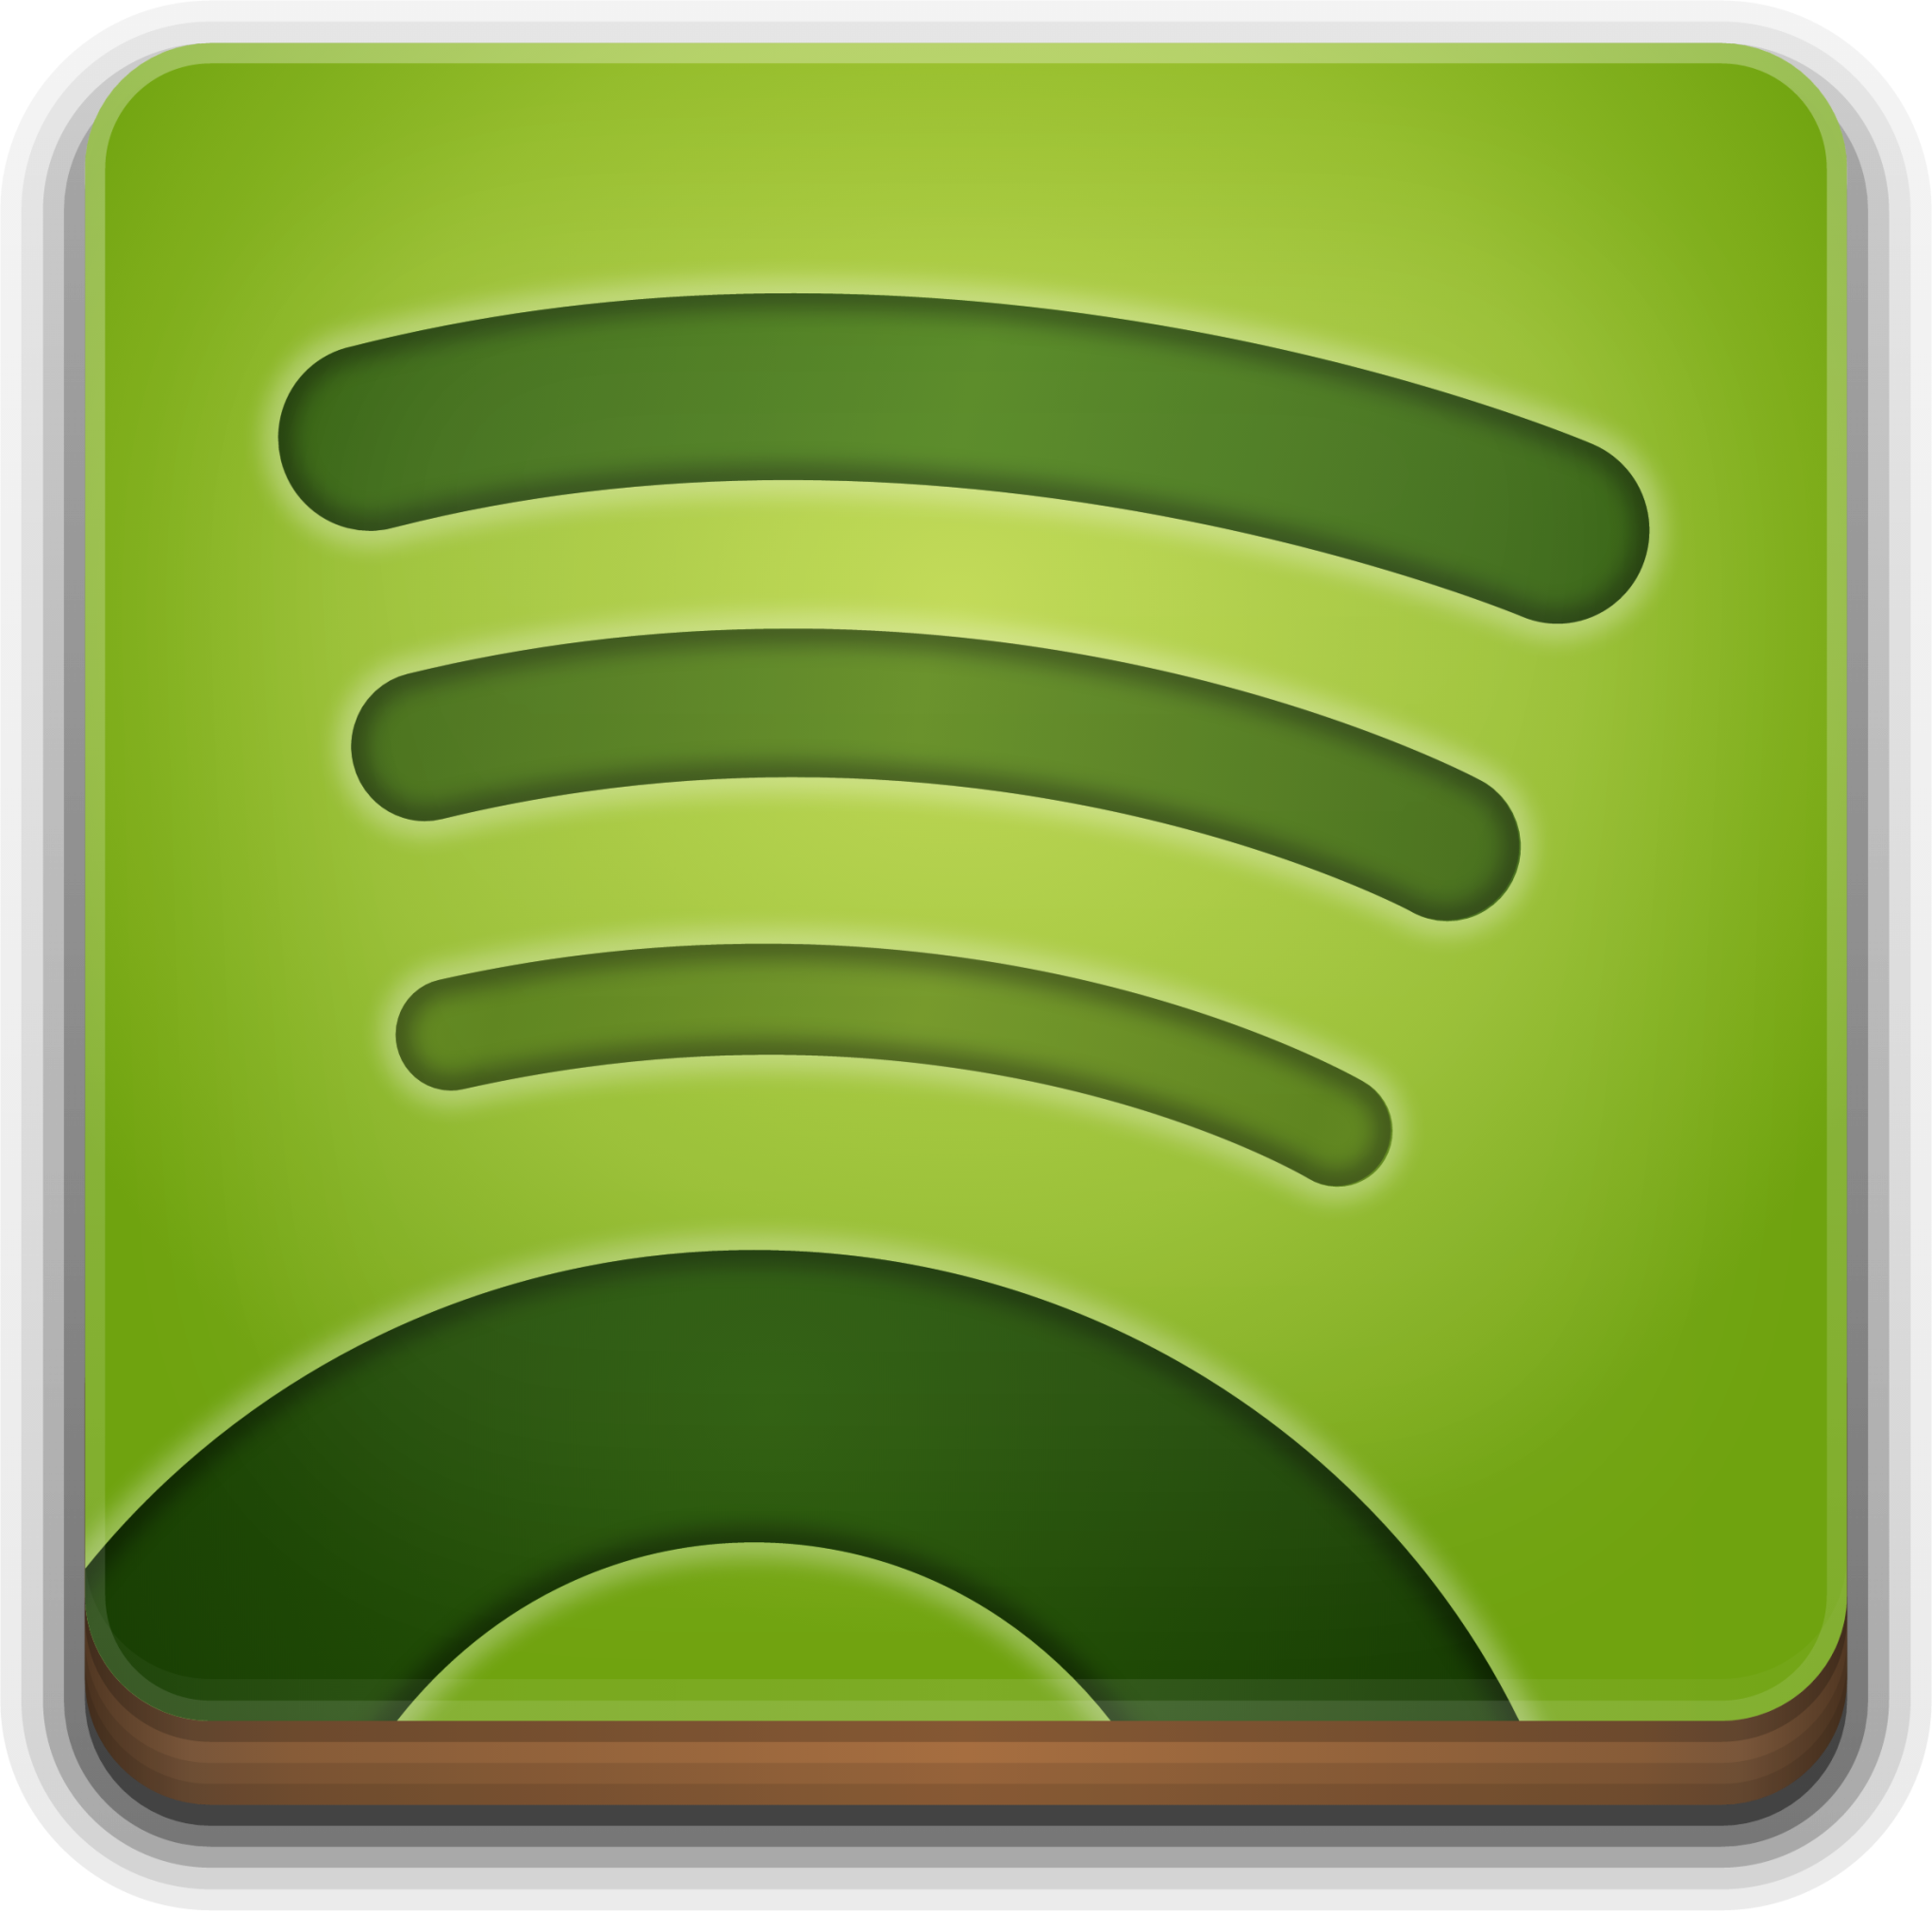 spotify fill logo Icon - Download for free – Iconduck